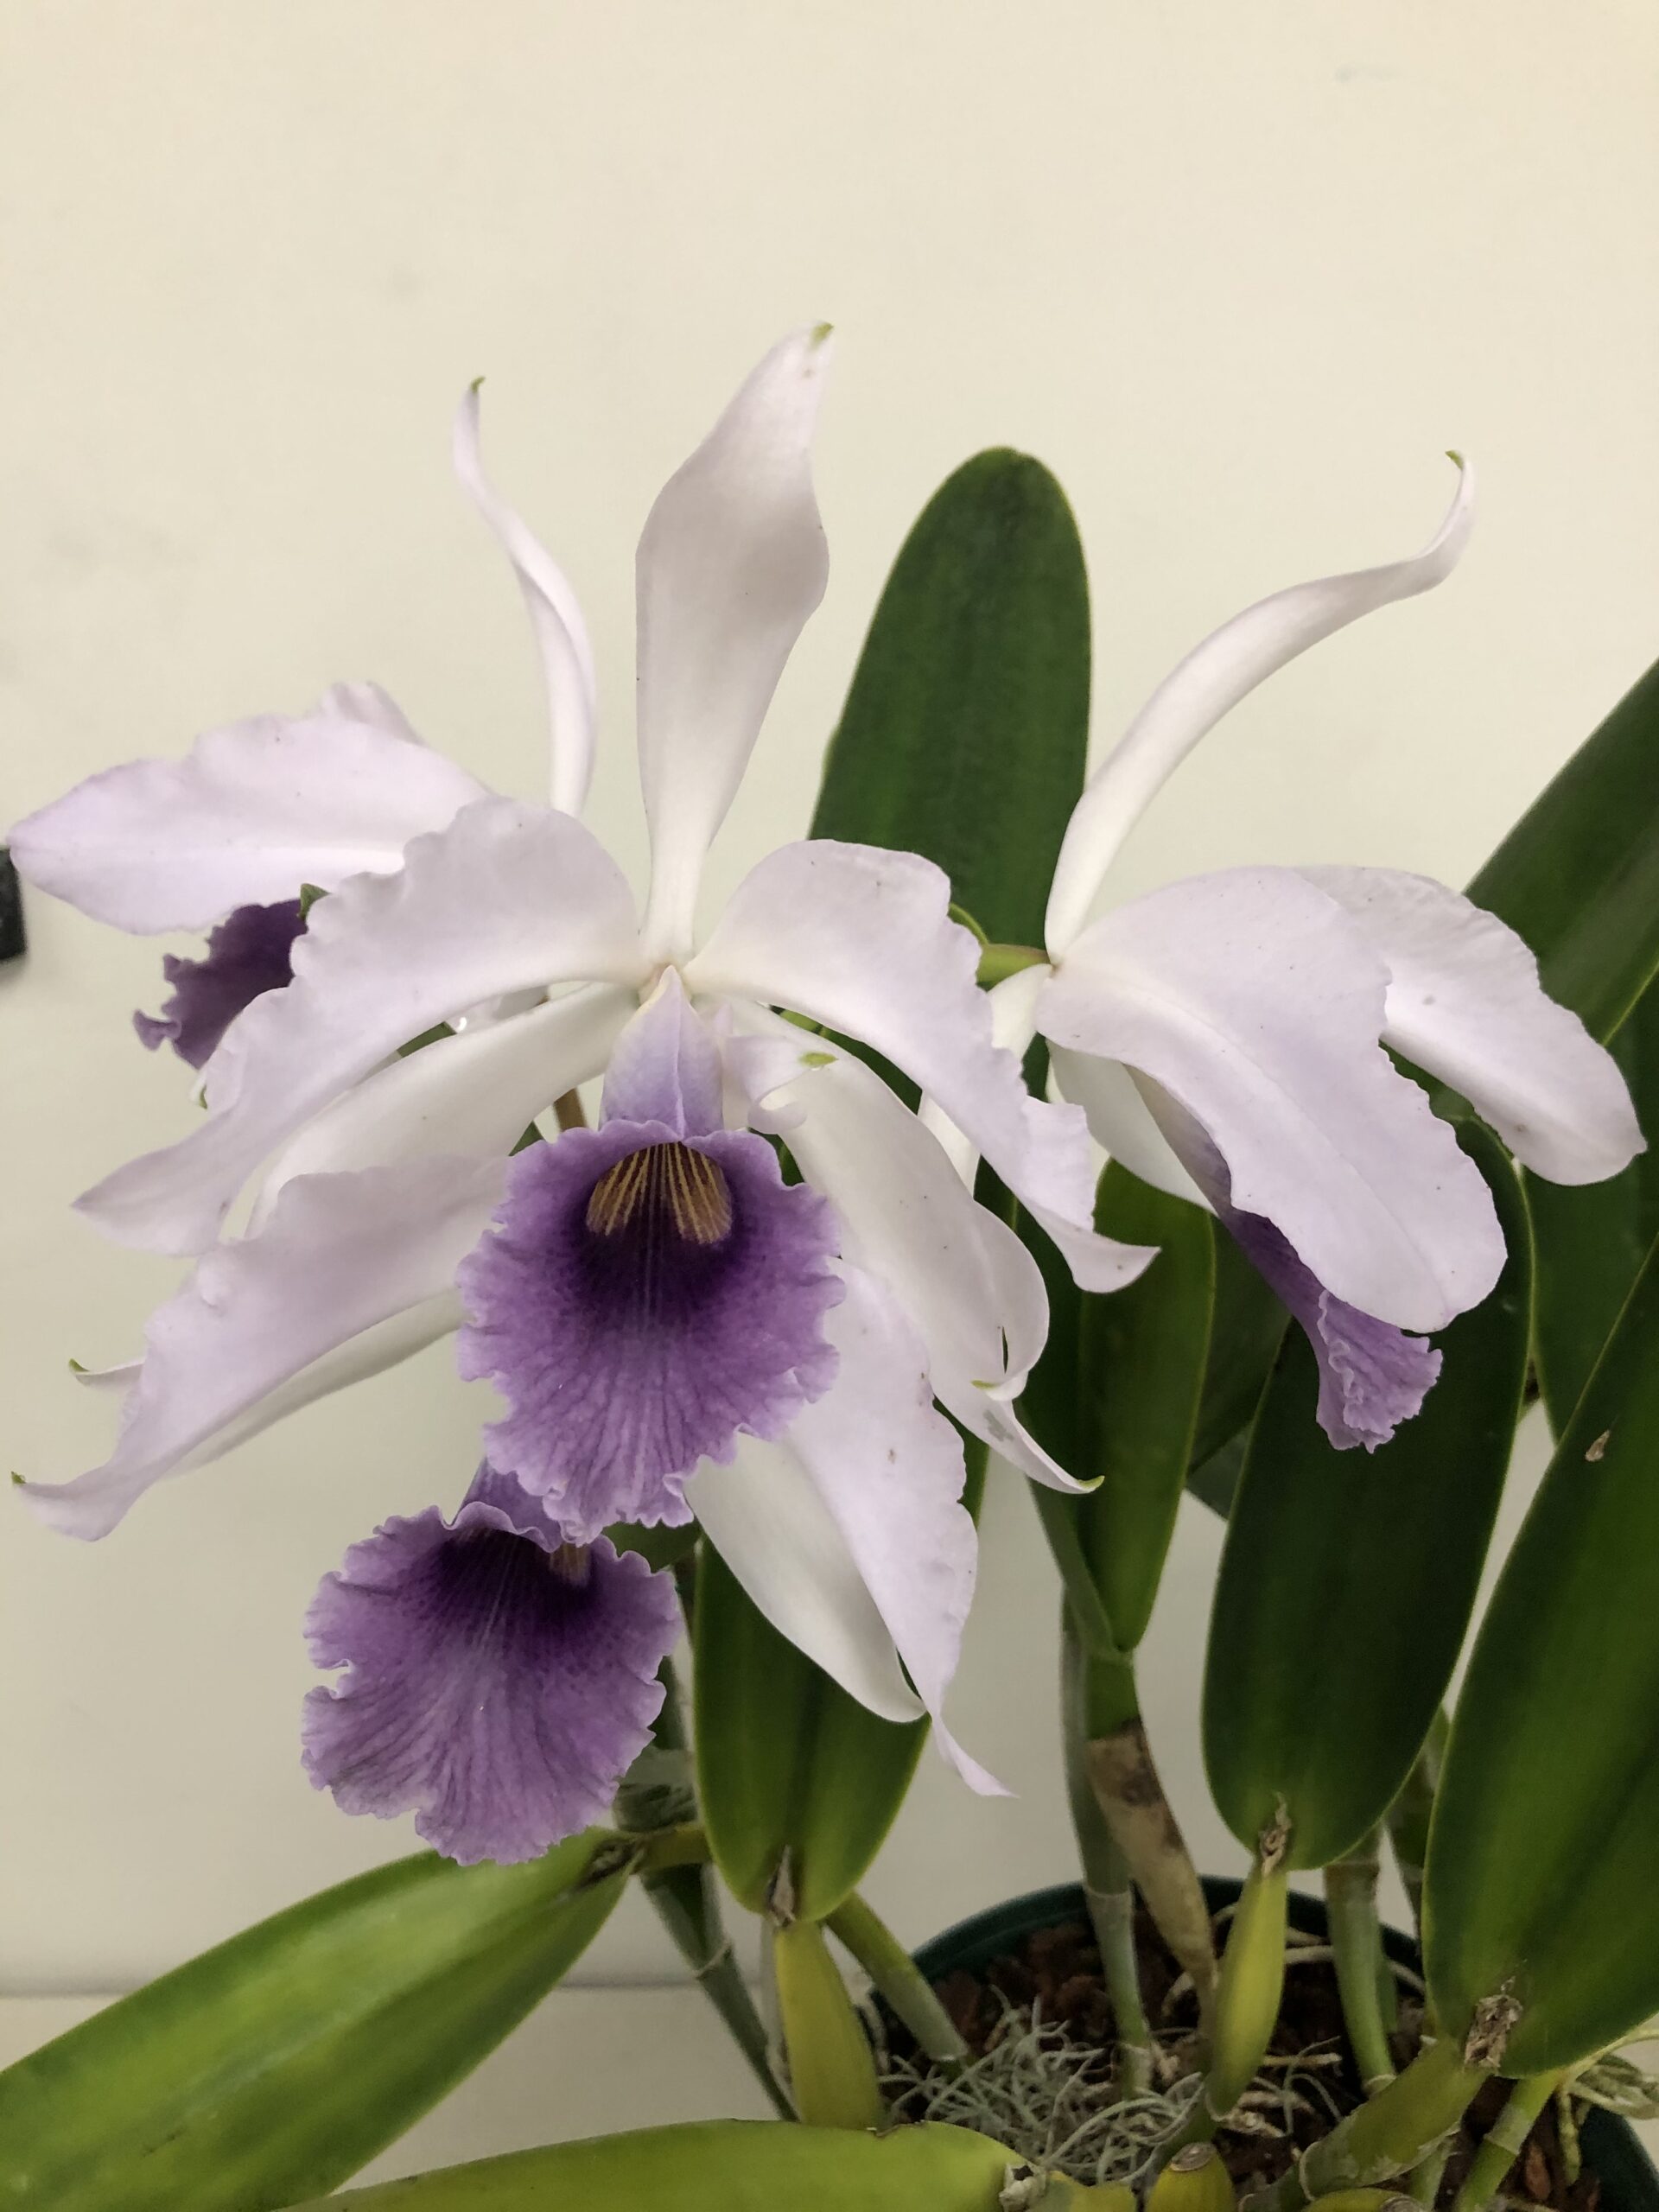 Cattleya no name. A plant with four large semi-alba flowers. The lip is a steely purple with yellow markings in the throat. The two petals are ruffled. The petals and sepals are pure white.